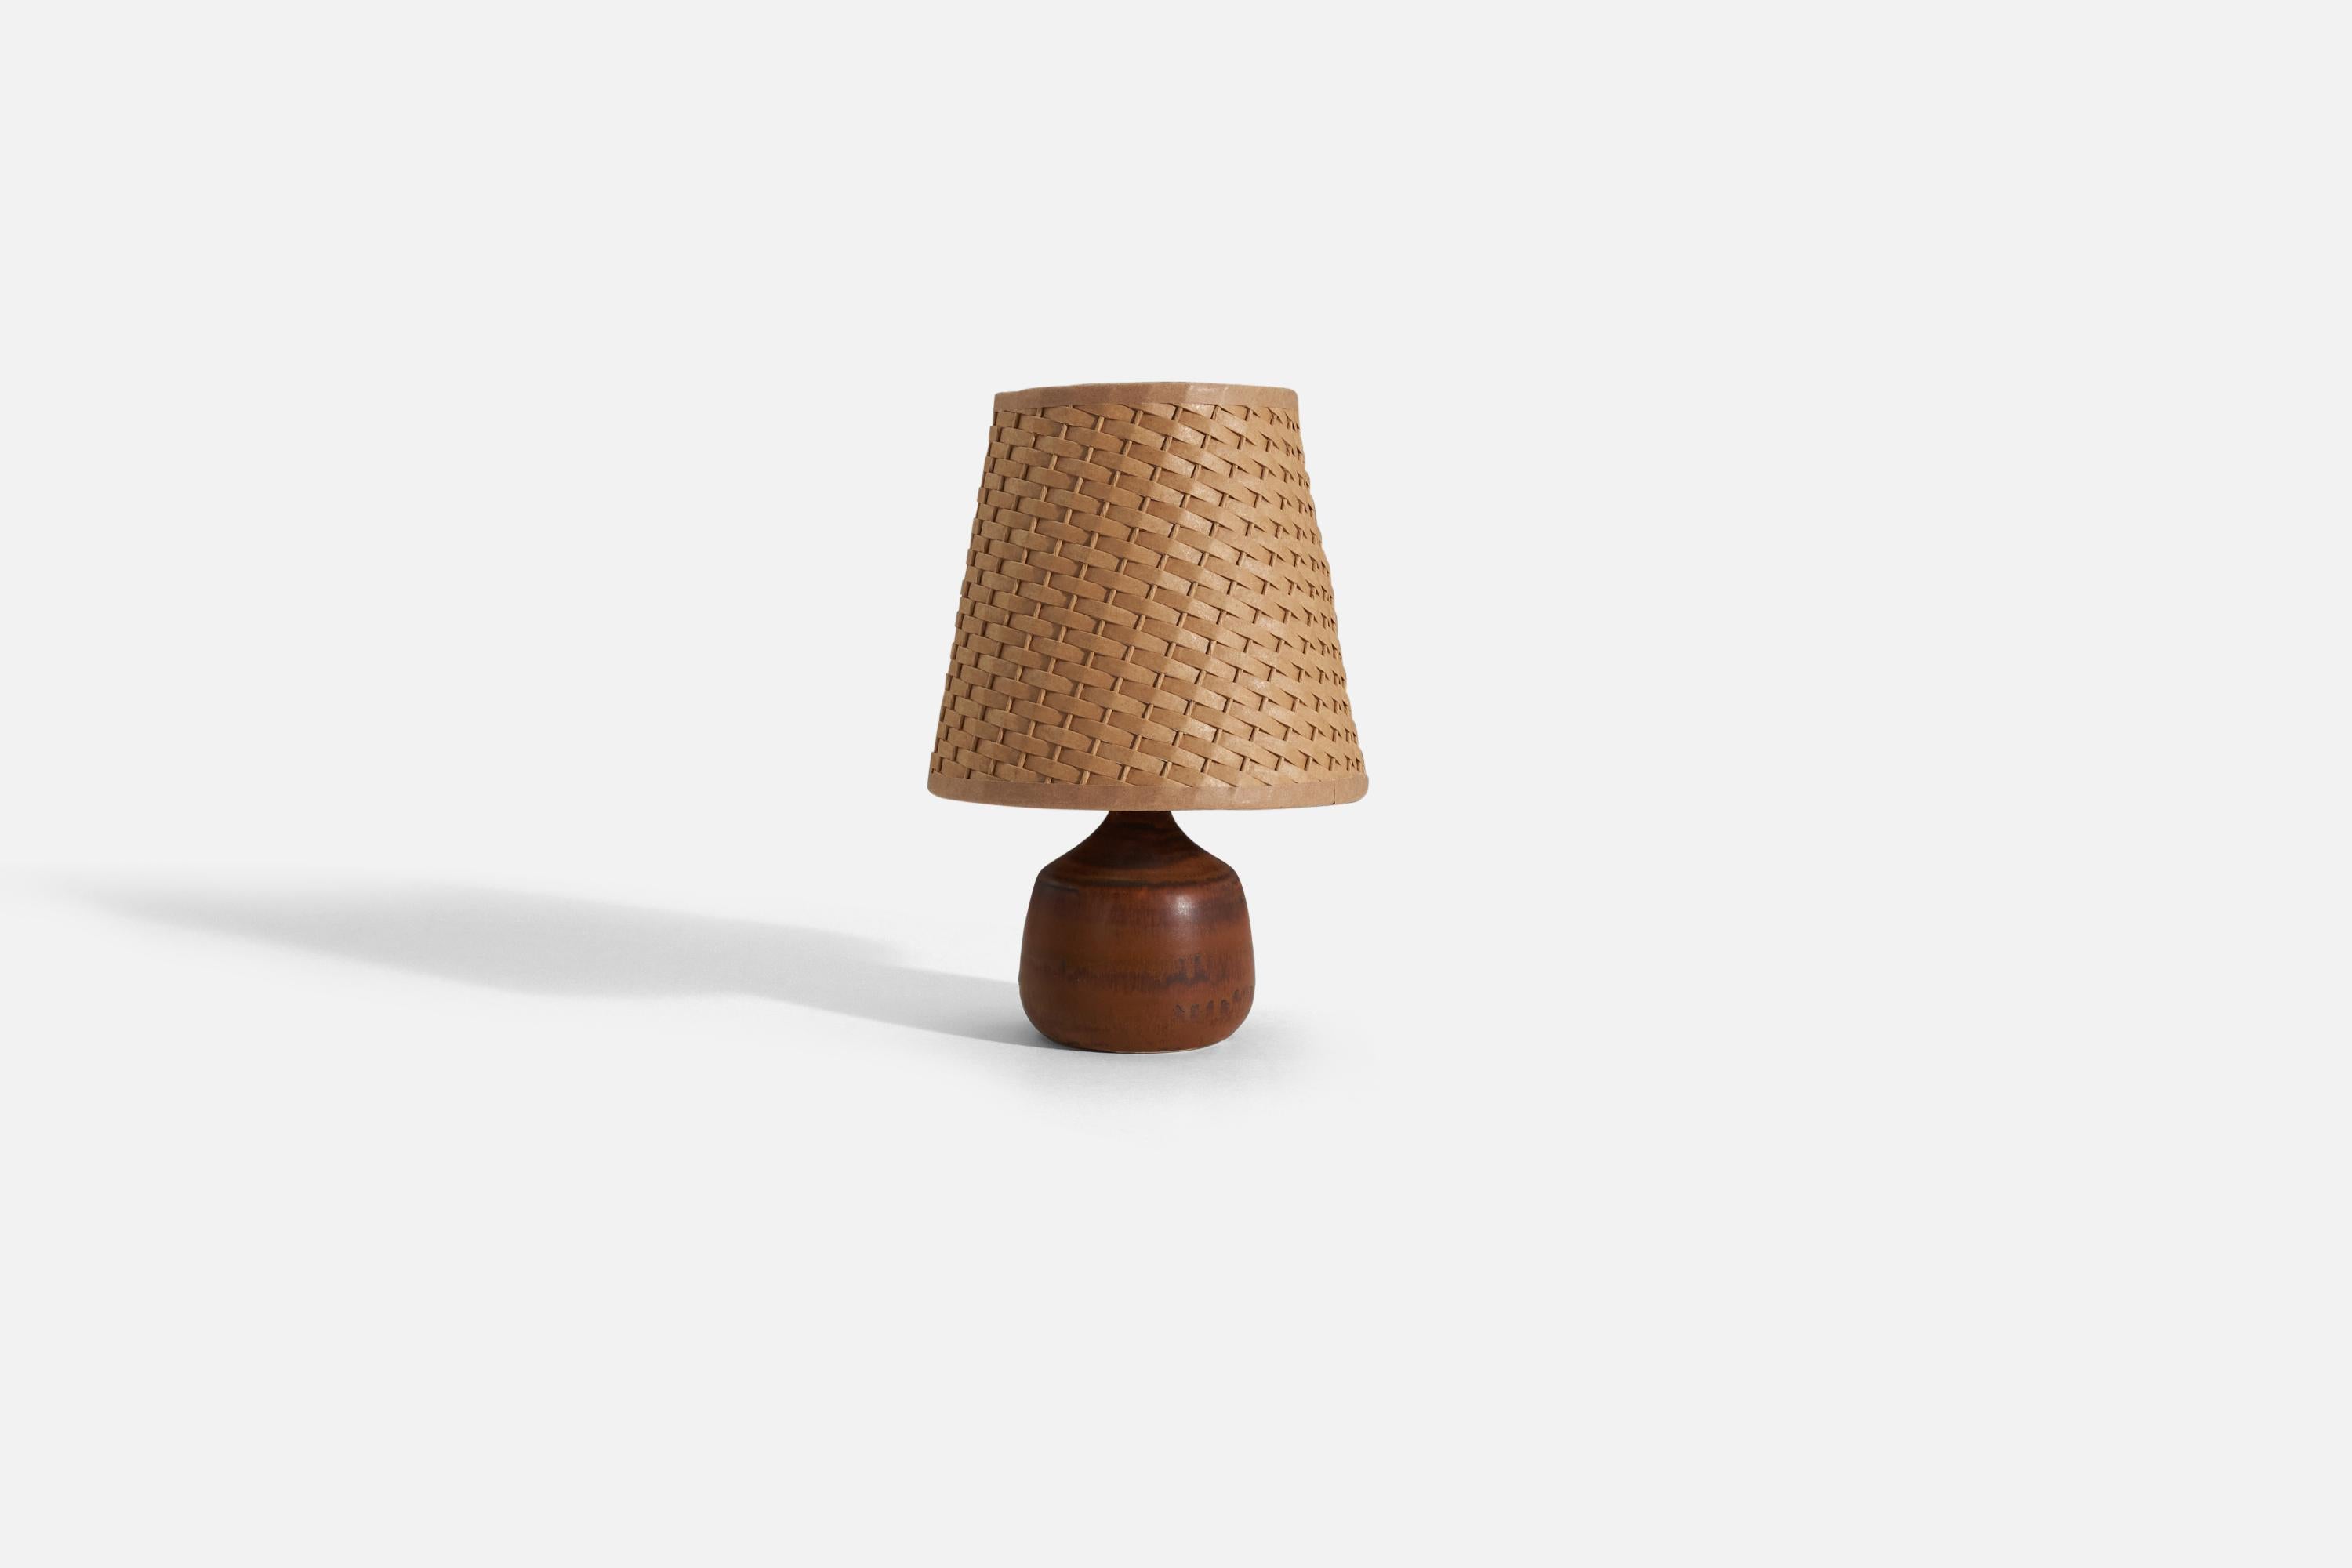 Gunnar Borg, Table Lamp, Brown-Glazed Stoneware, Rattan, Sweden, 1960s In Good Condition For Sale In High Point, NC